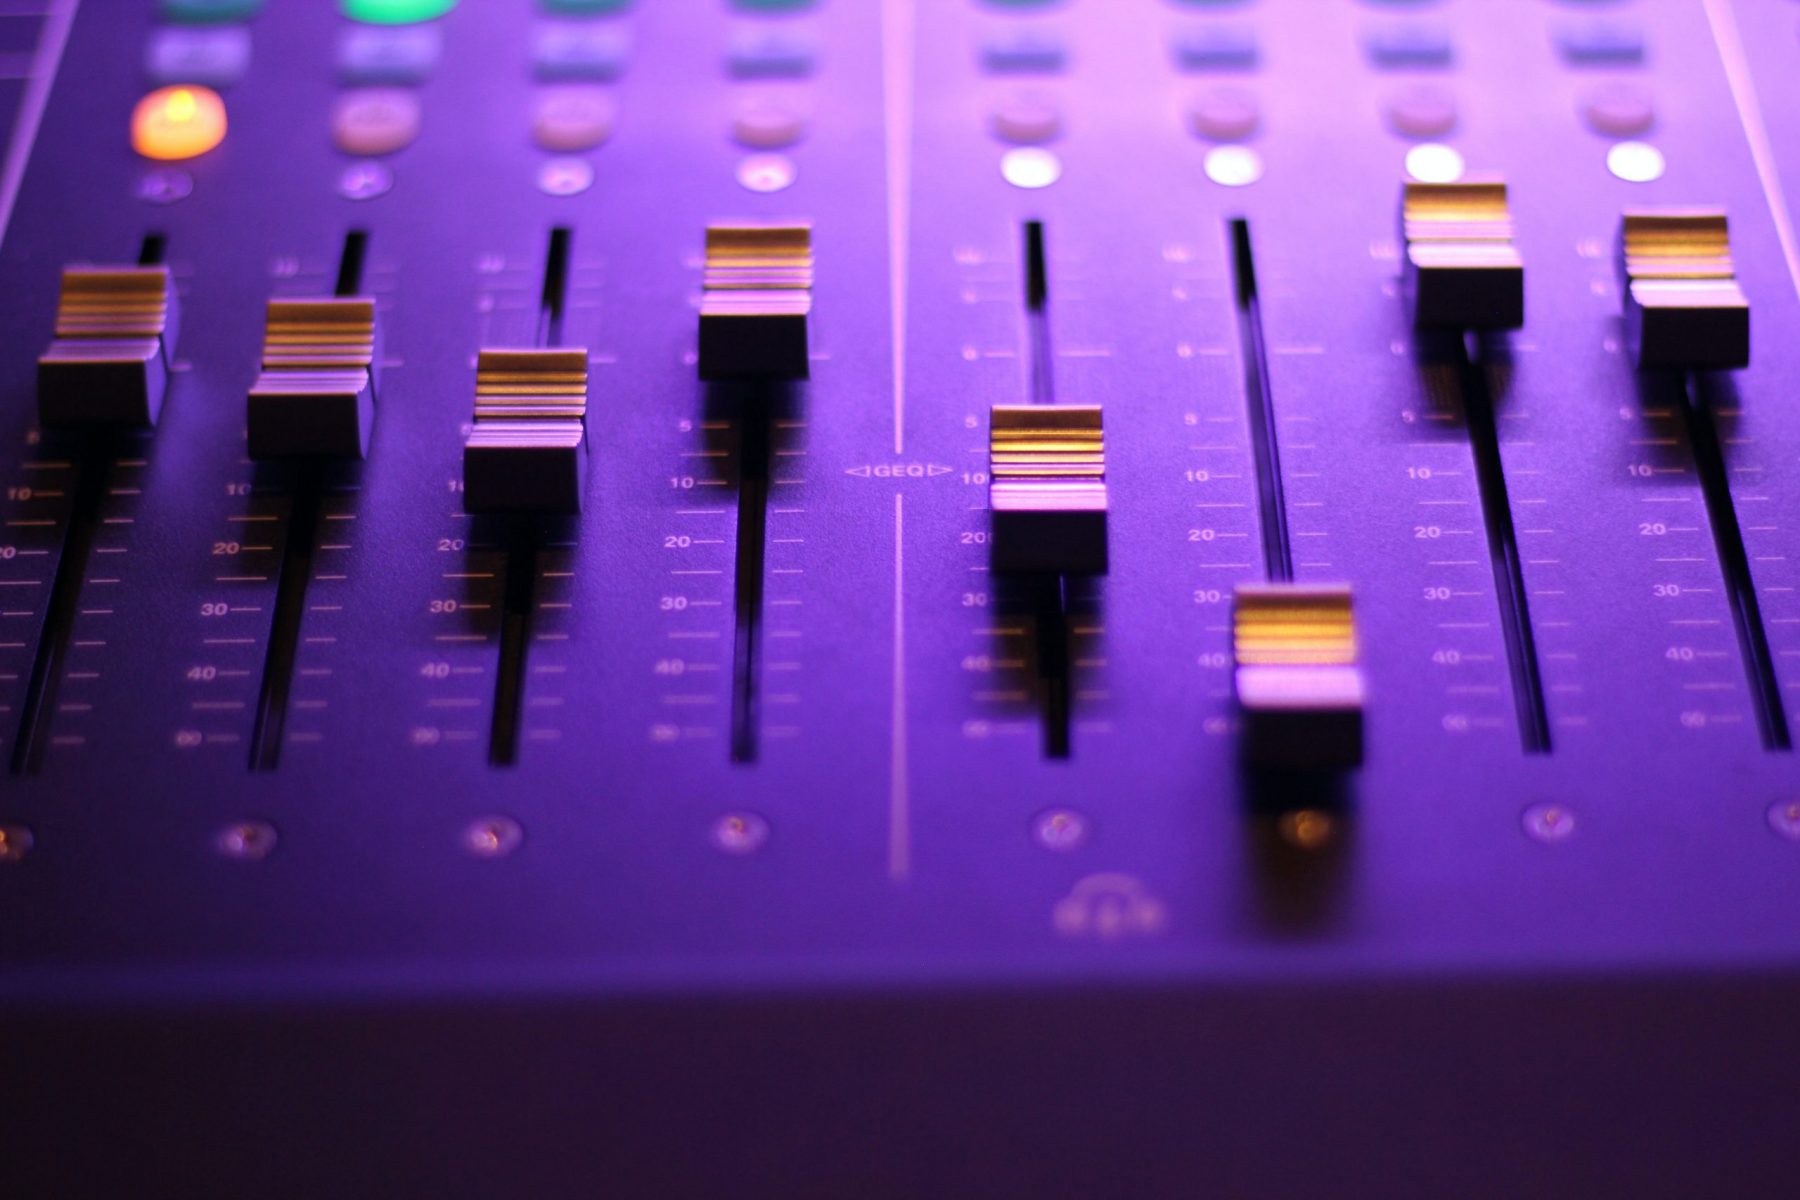 knobs on studio equipment in an article about the music industry